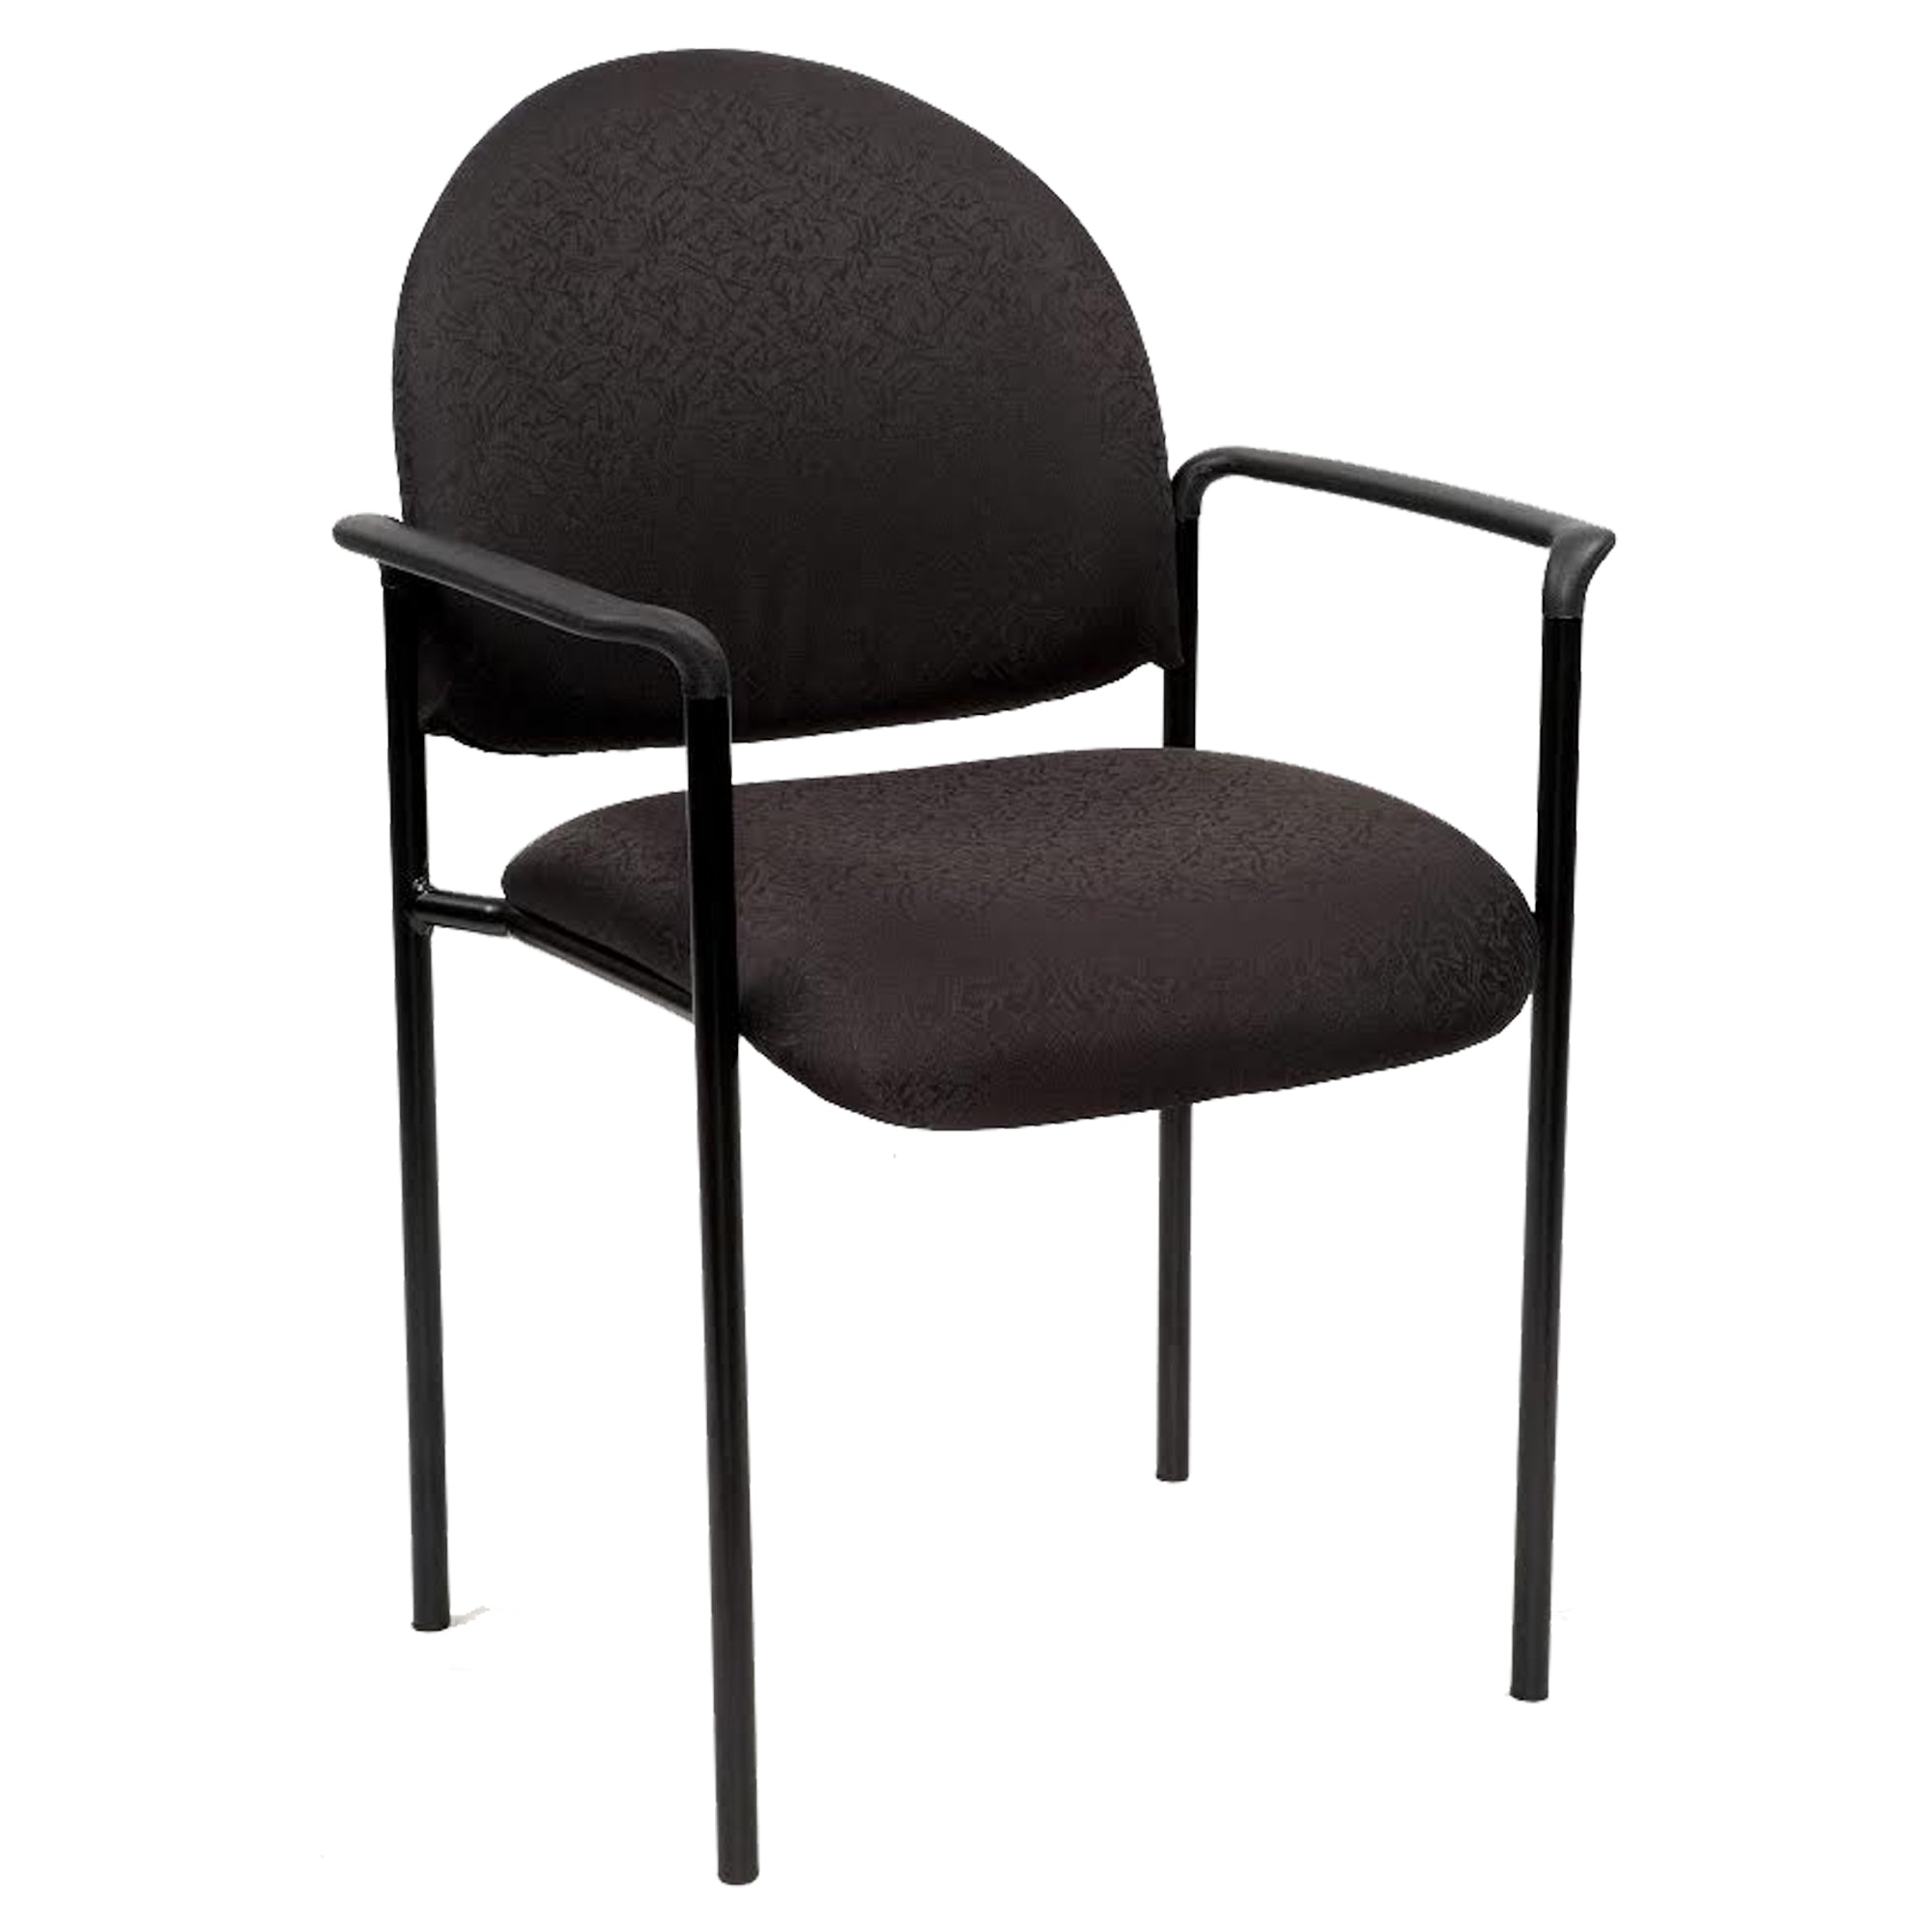 Stacking Visitor Chair with Arm